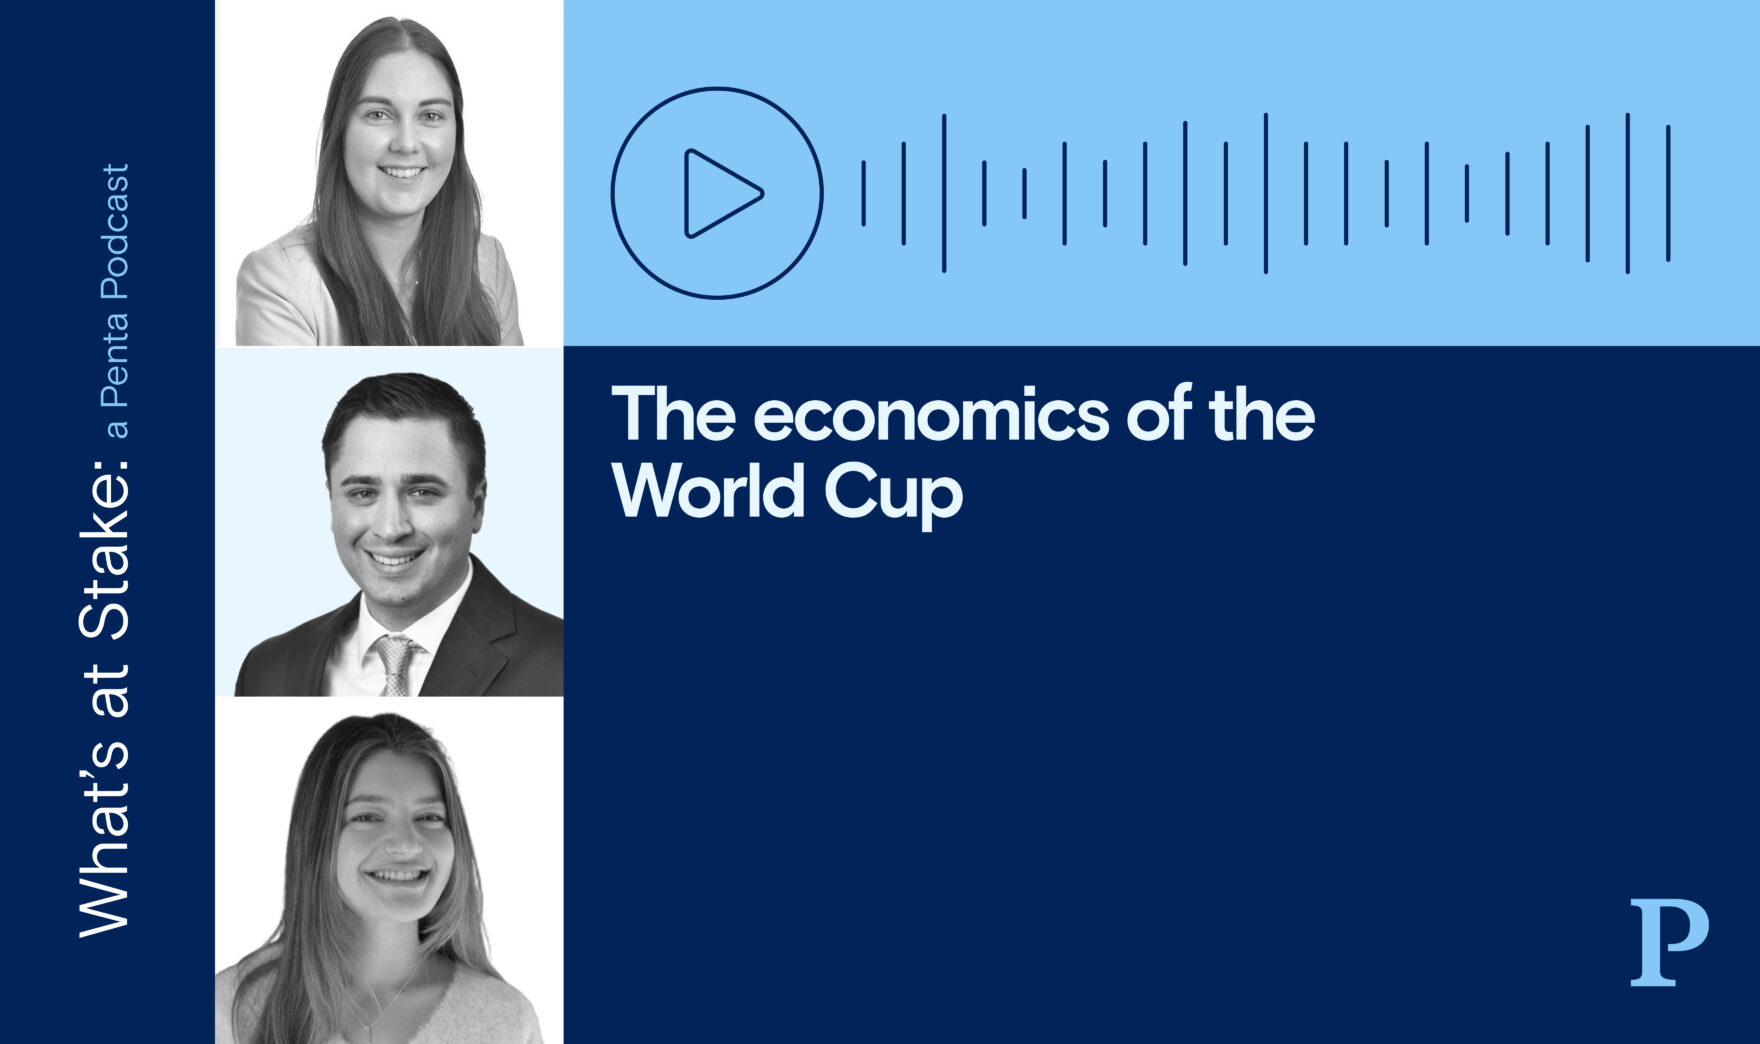 The economics of the World Cup